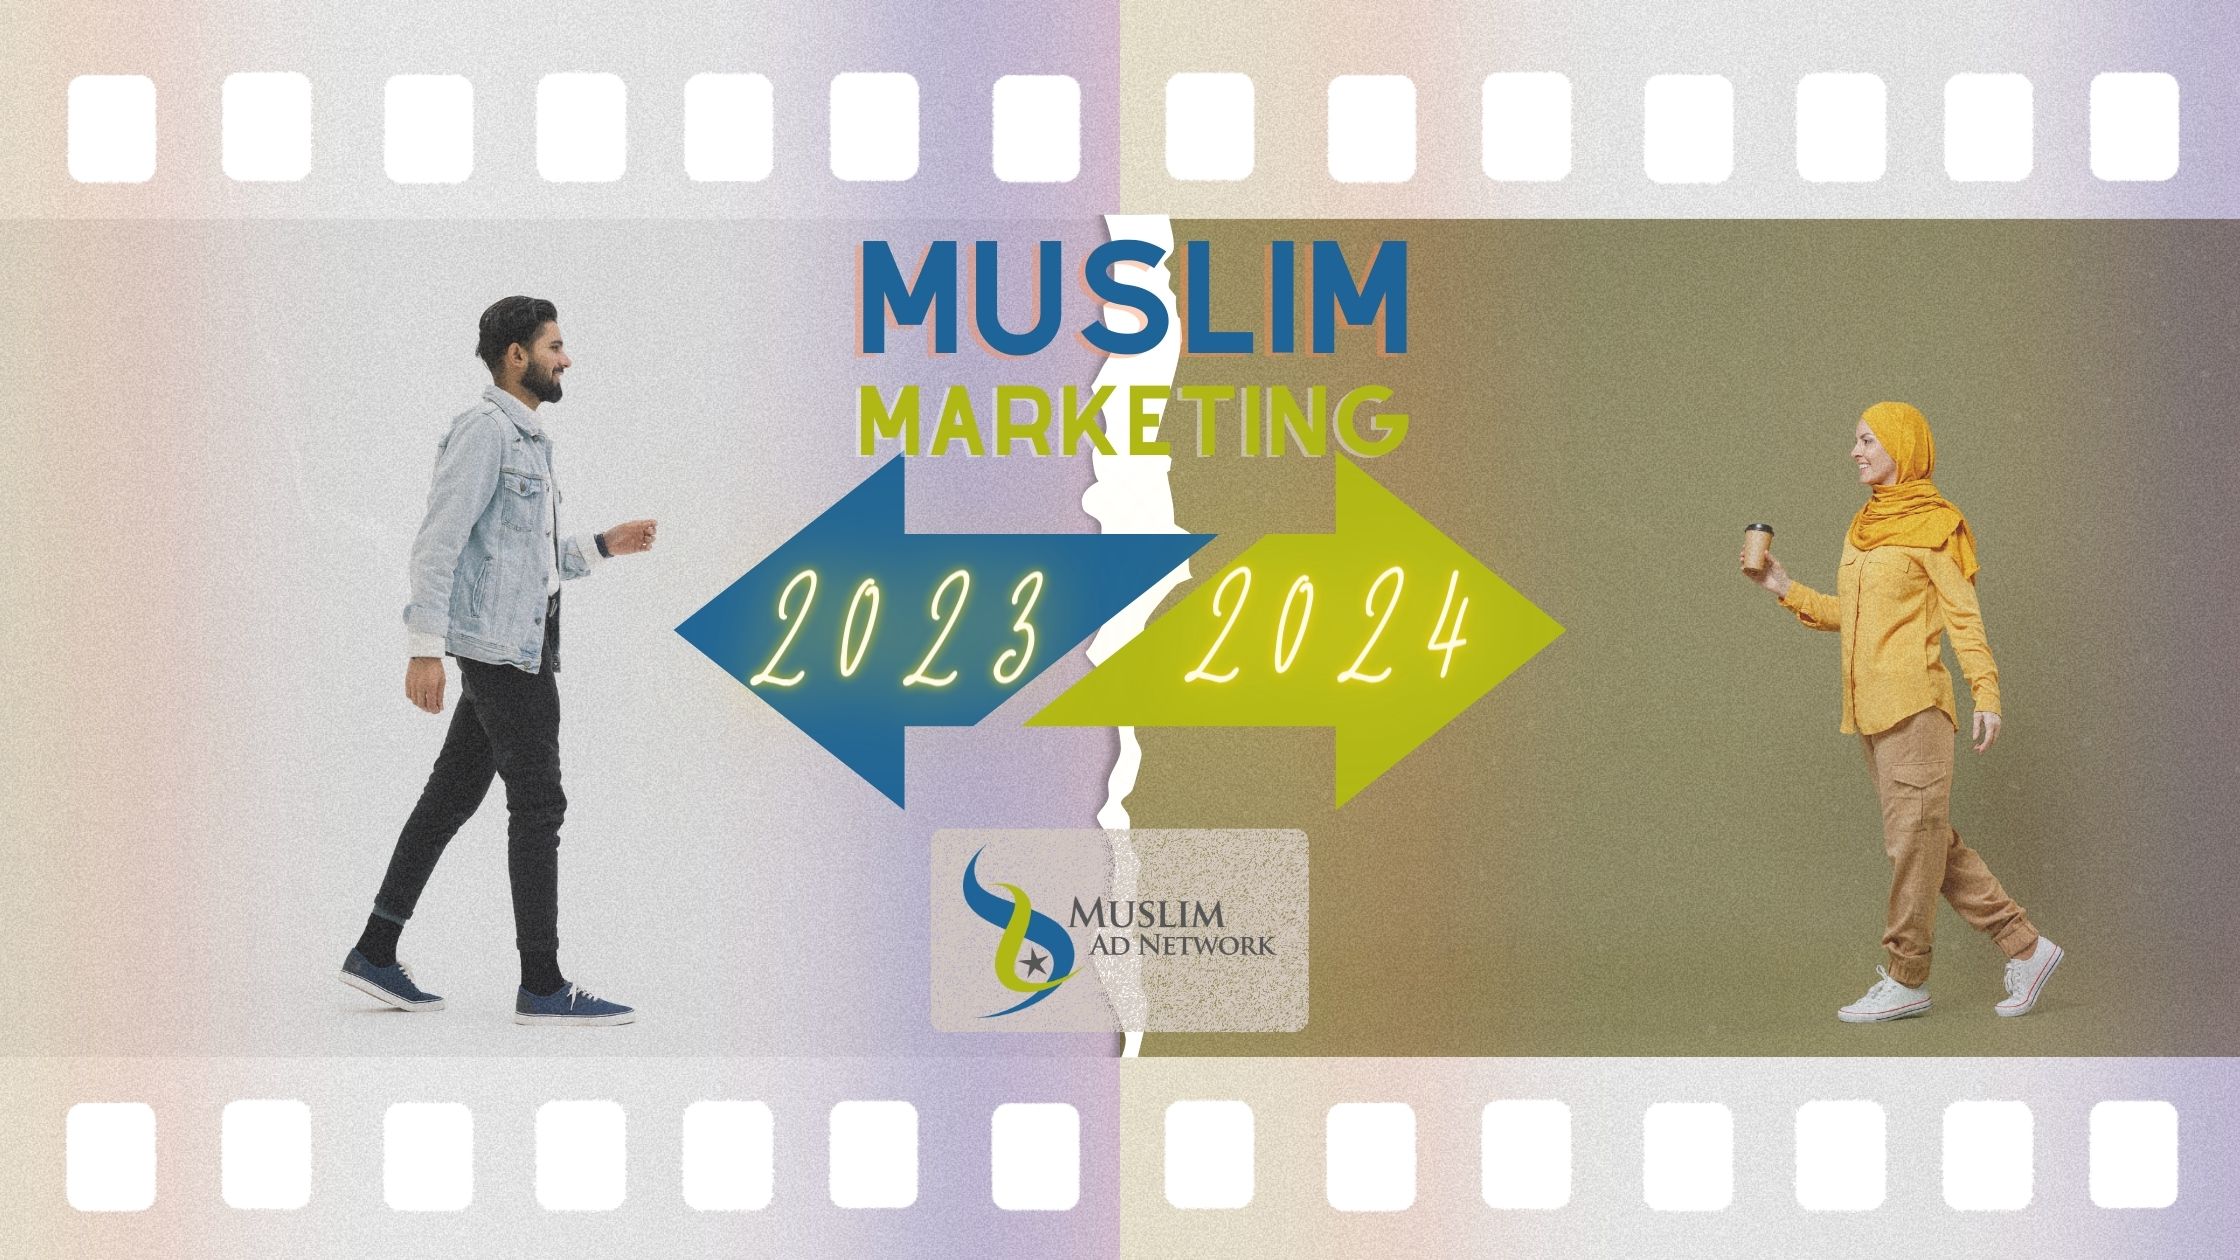 3 Easy Marketing Trends Muslim Brands Should Implement for the Rest of 2023